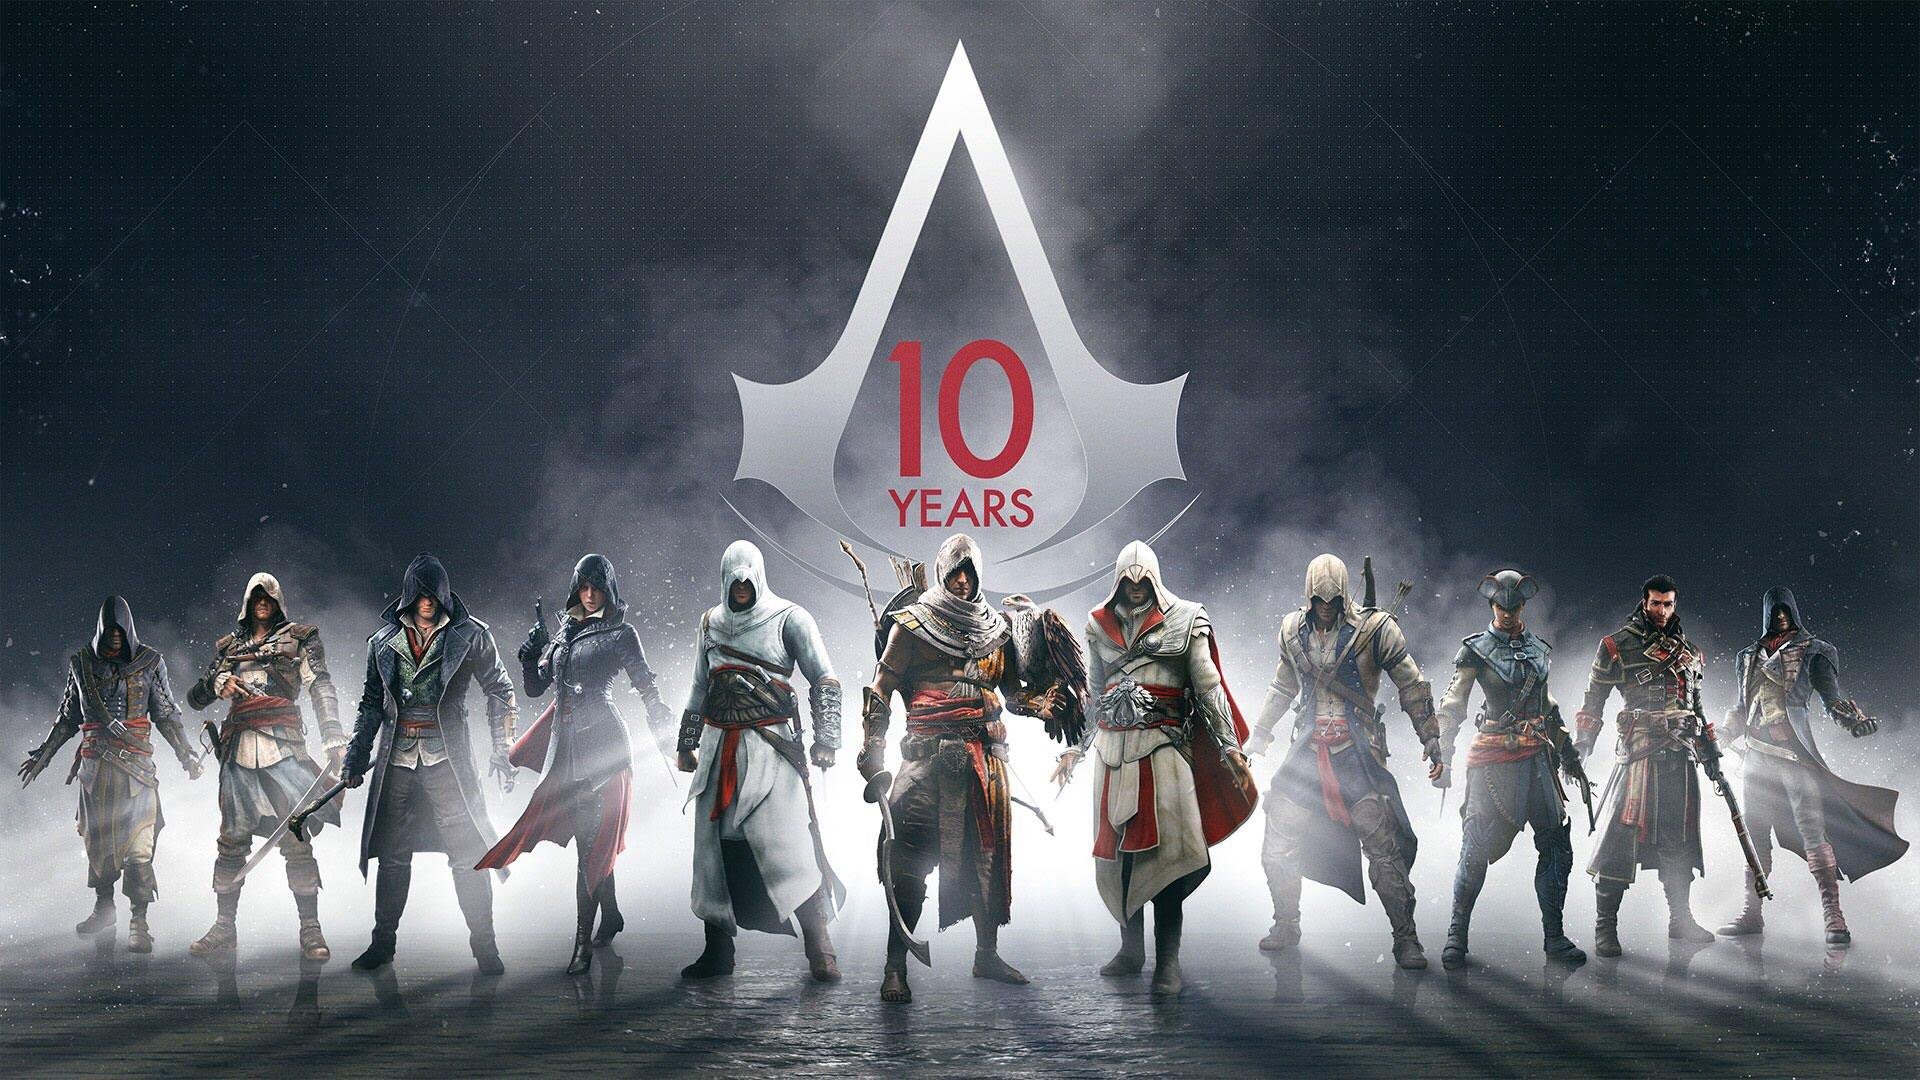 Assassins Creed 10 Years, Assassin&039 - Assassin's Creed 10 Years , HD Wallpaper & Backgrounds